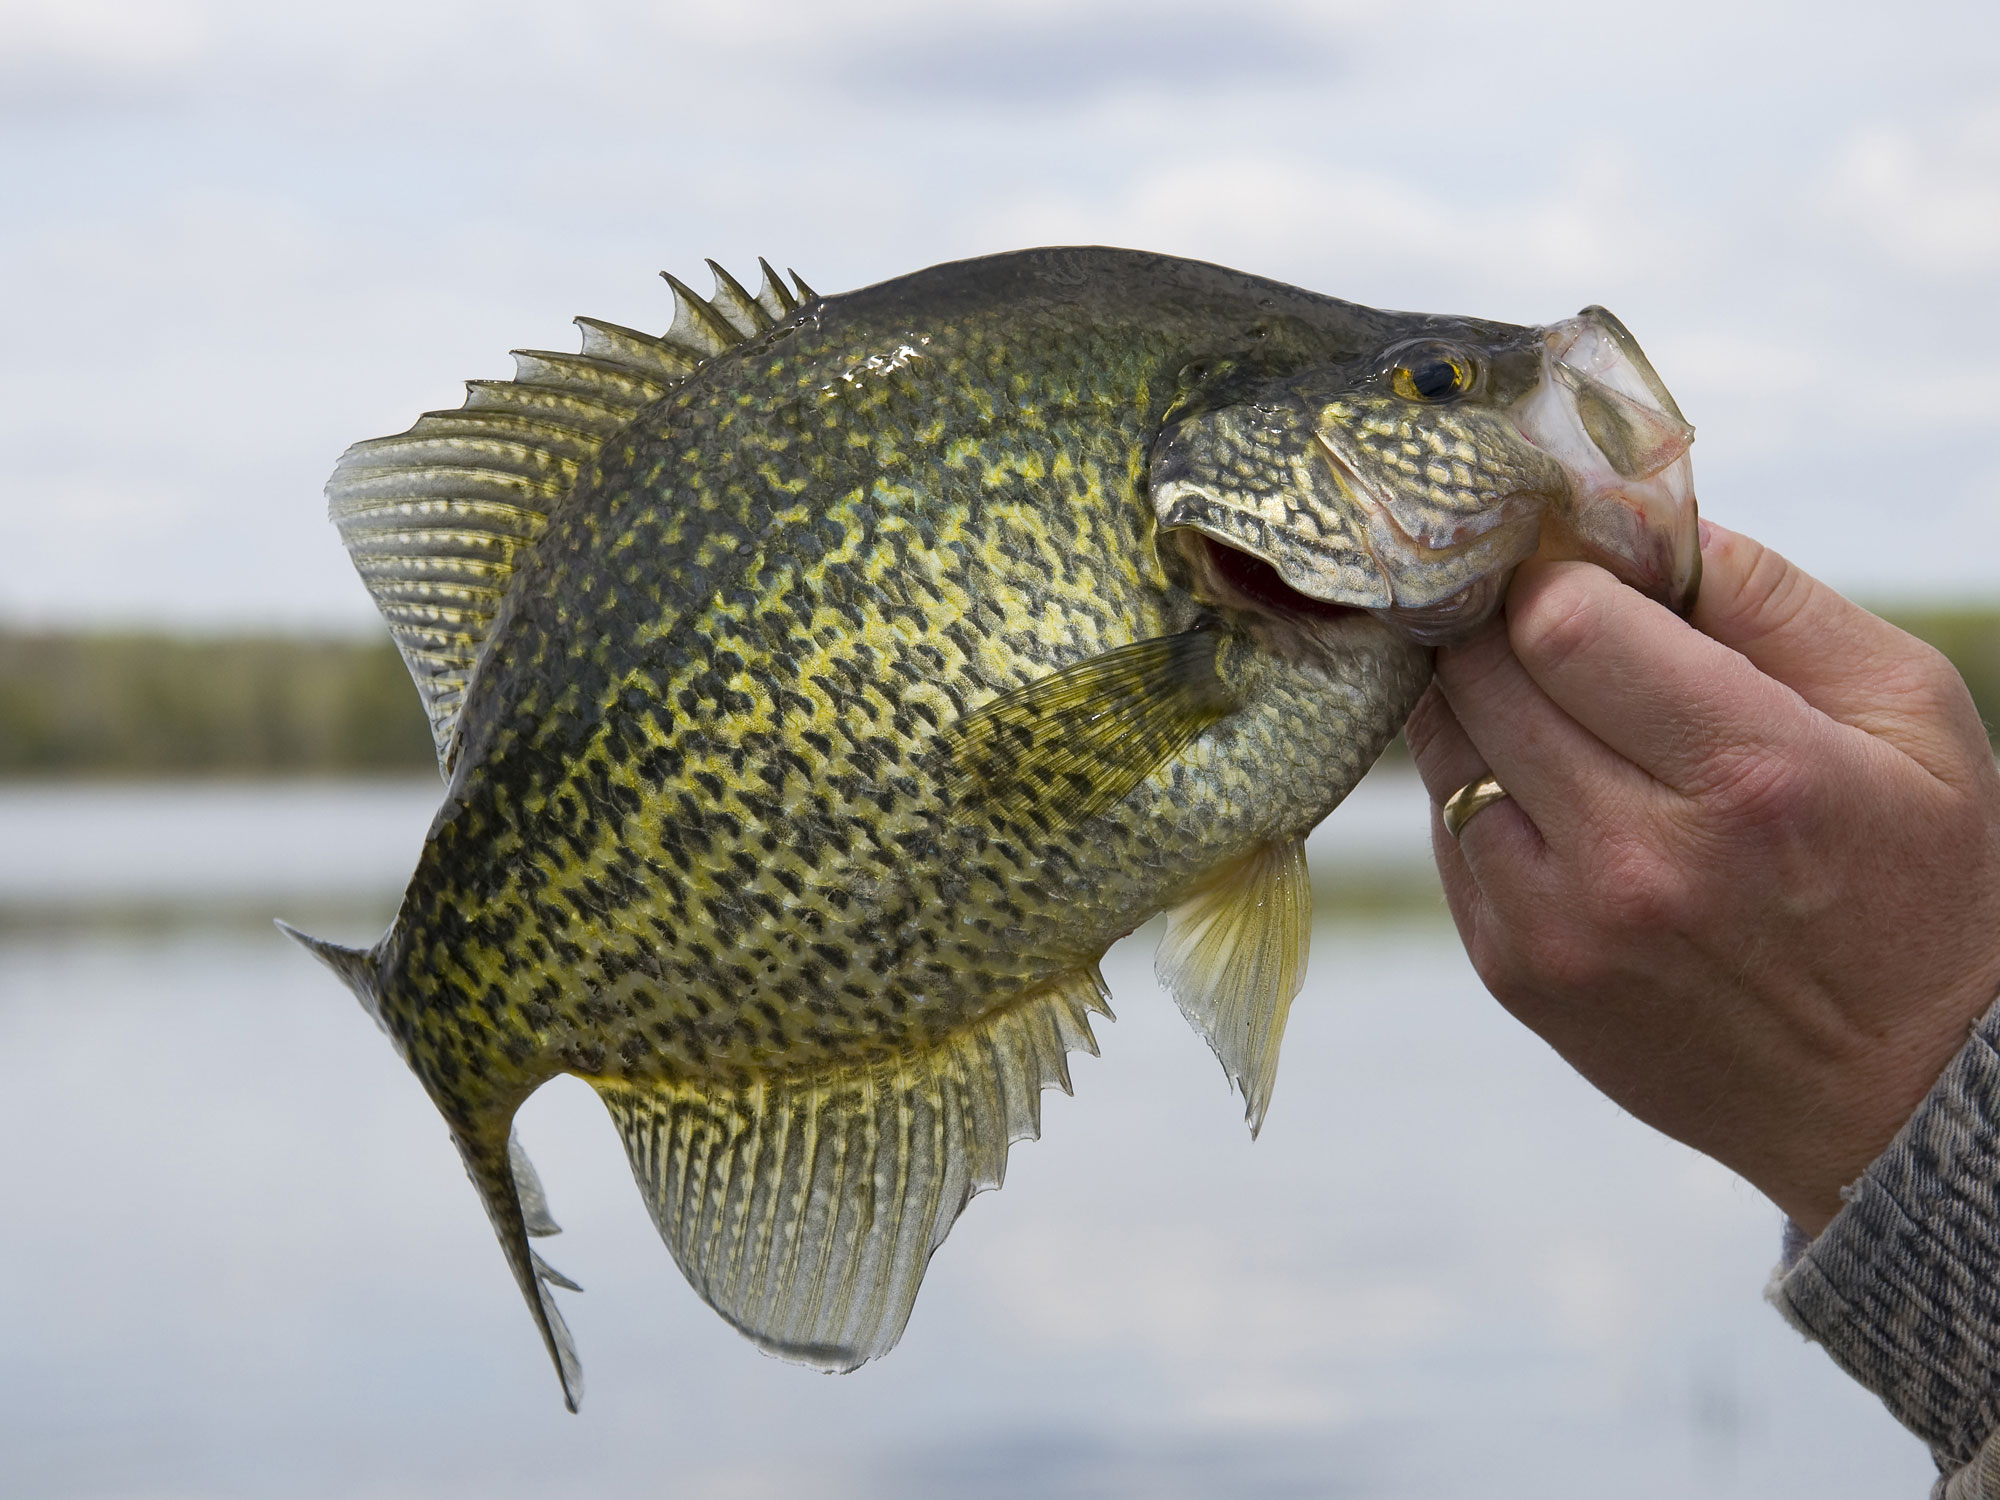 Things we love: Those fiercely protective crappies